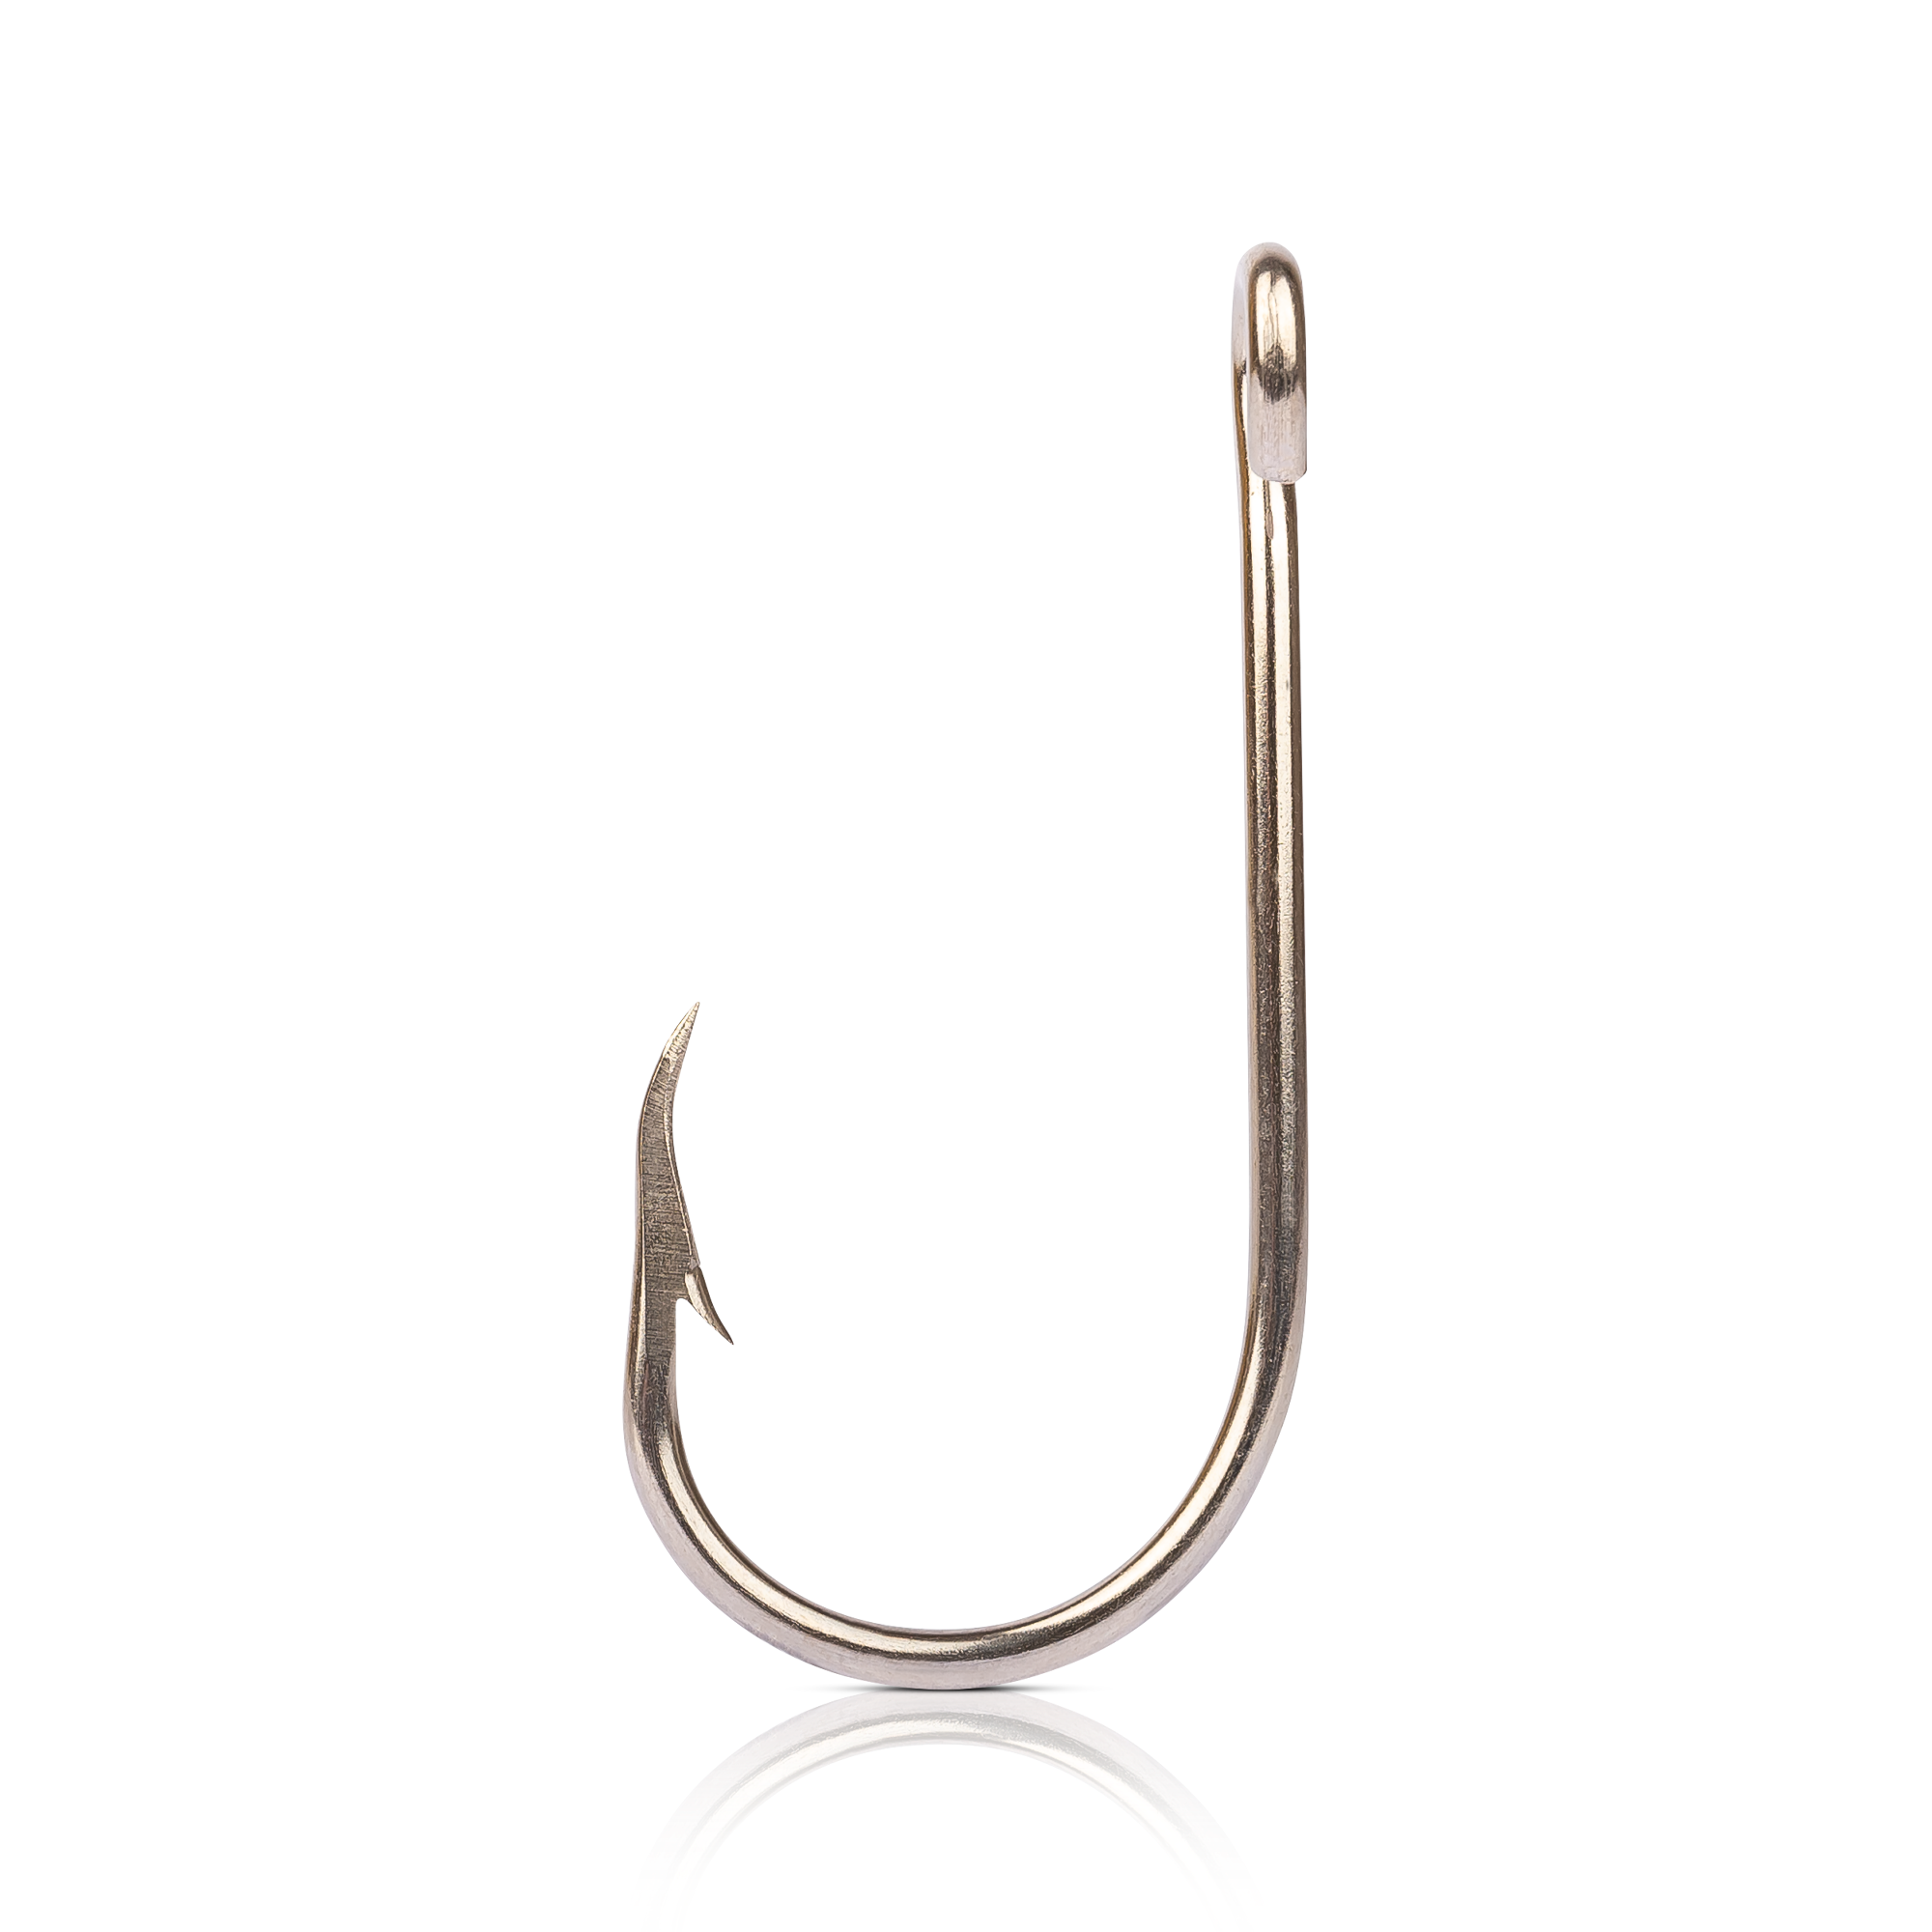 Salmon Siwash Hook - 3X Strong - 4/0 / Stainless Steel / 100